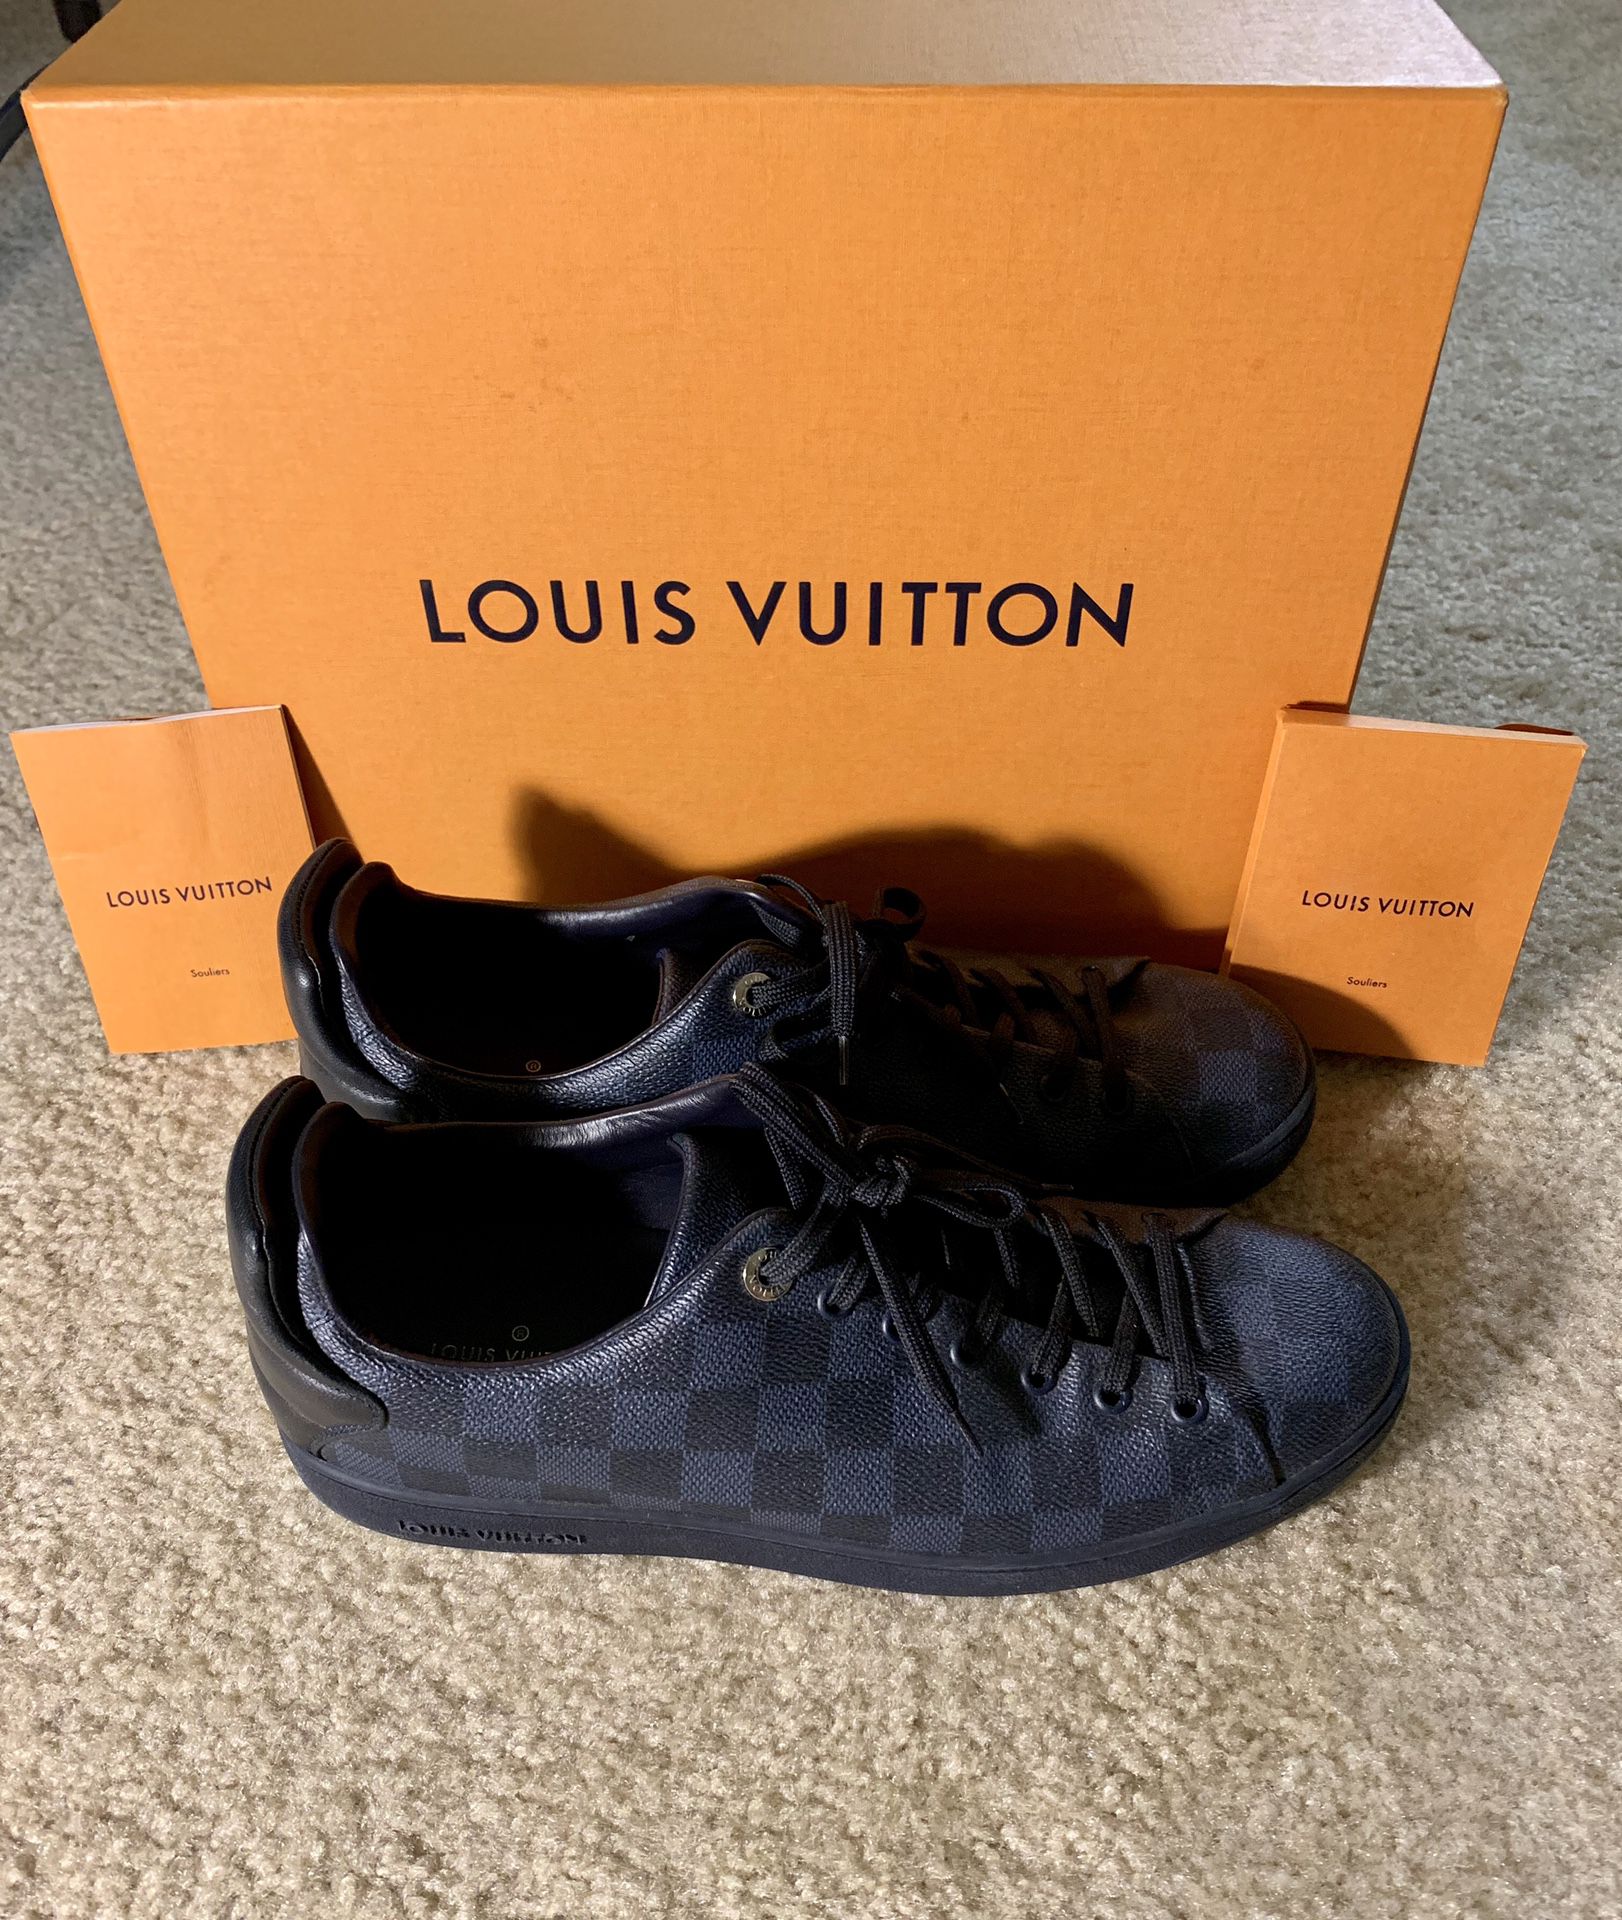 100% authentic fashion sneakers LV size 9US